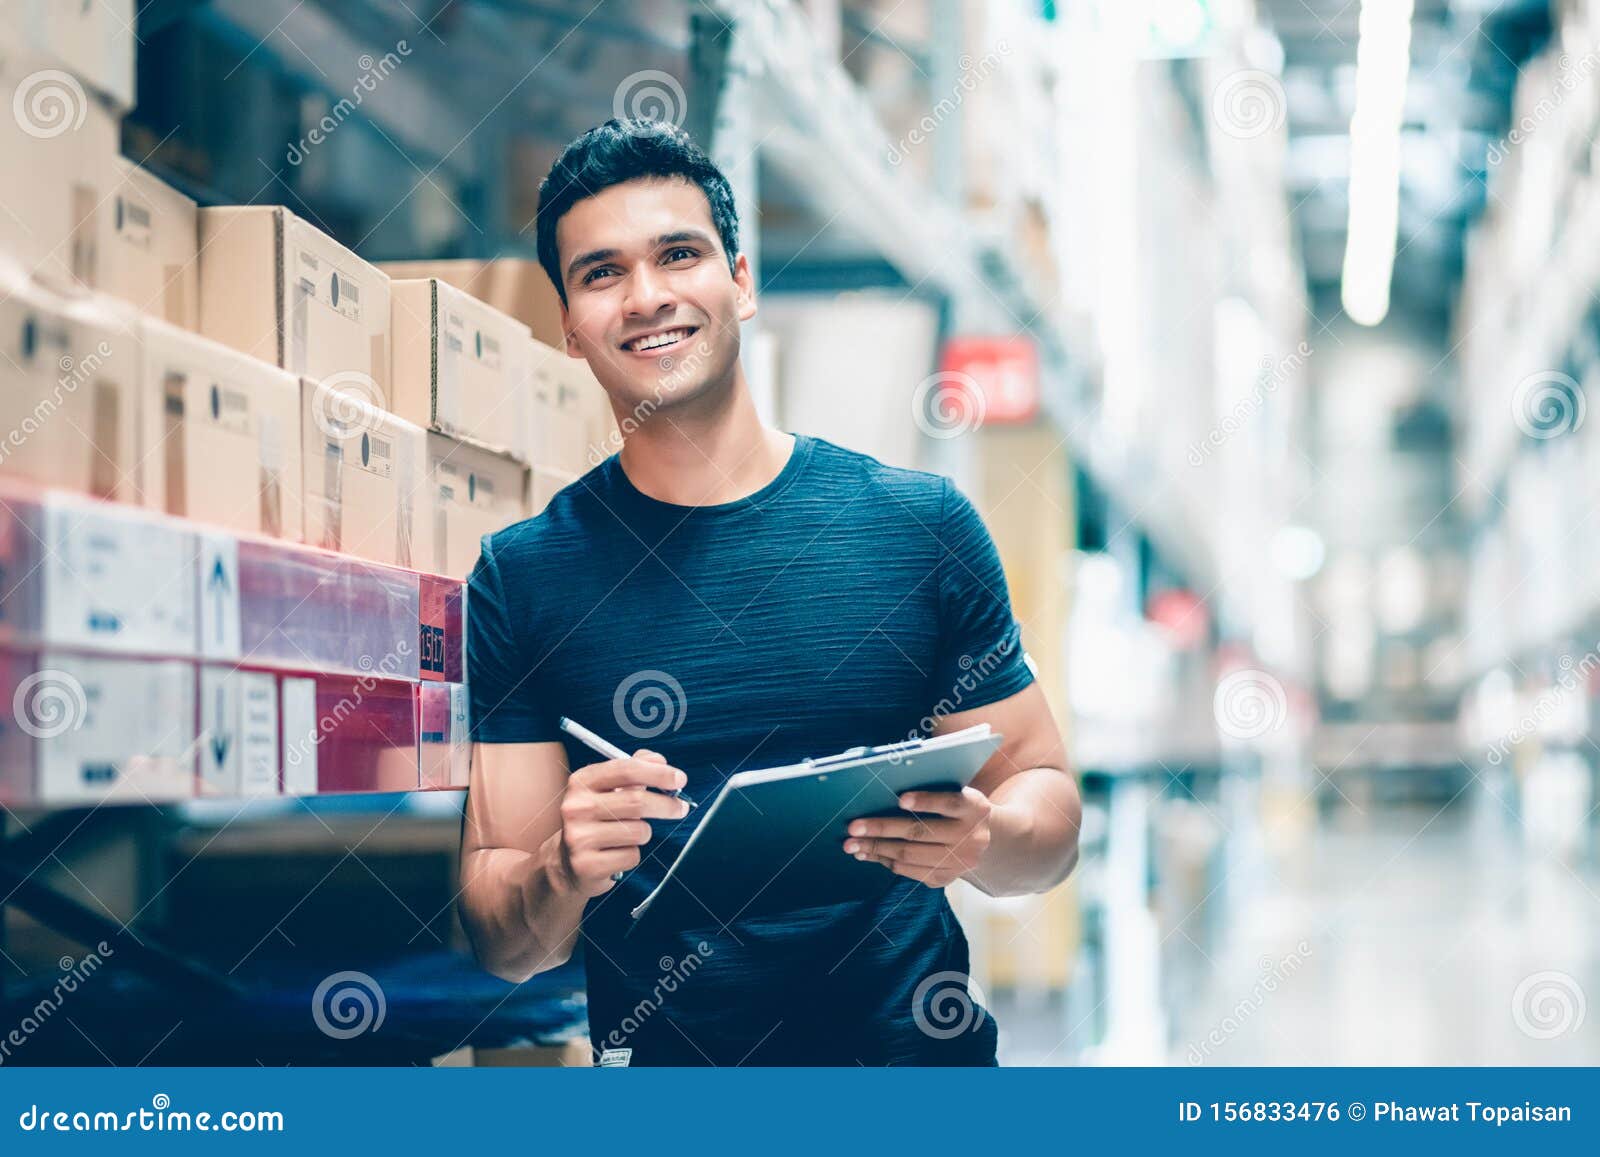 smart indian engineer man worker doing stocktaking of product management in cardboard box on shelves in warehouse.